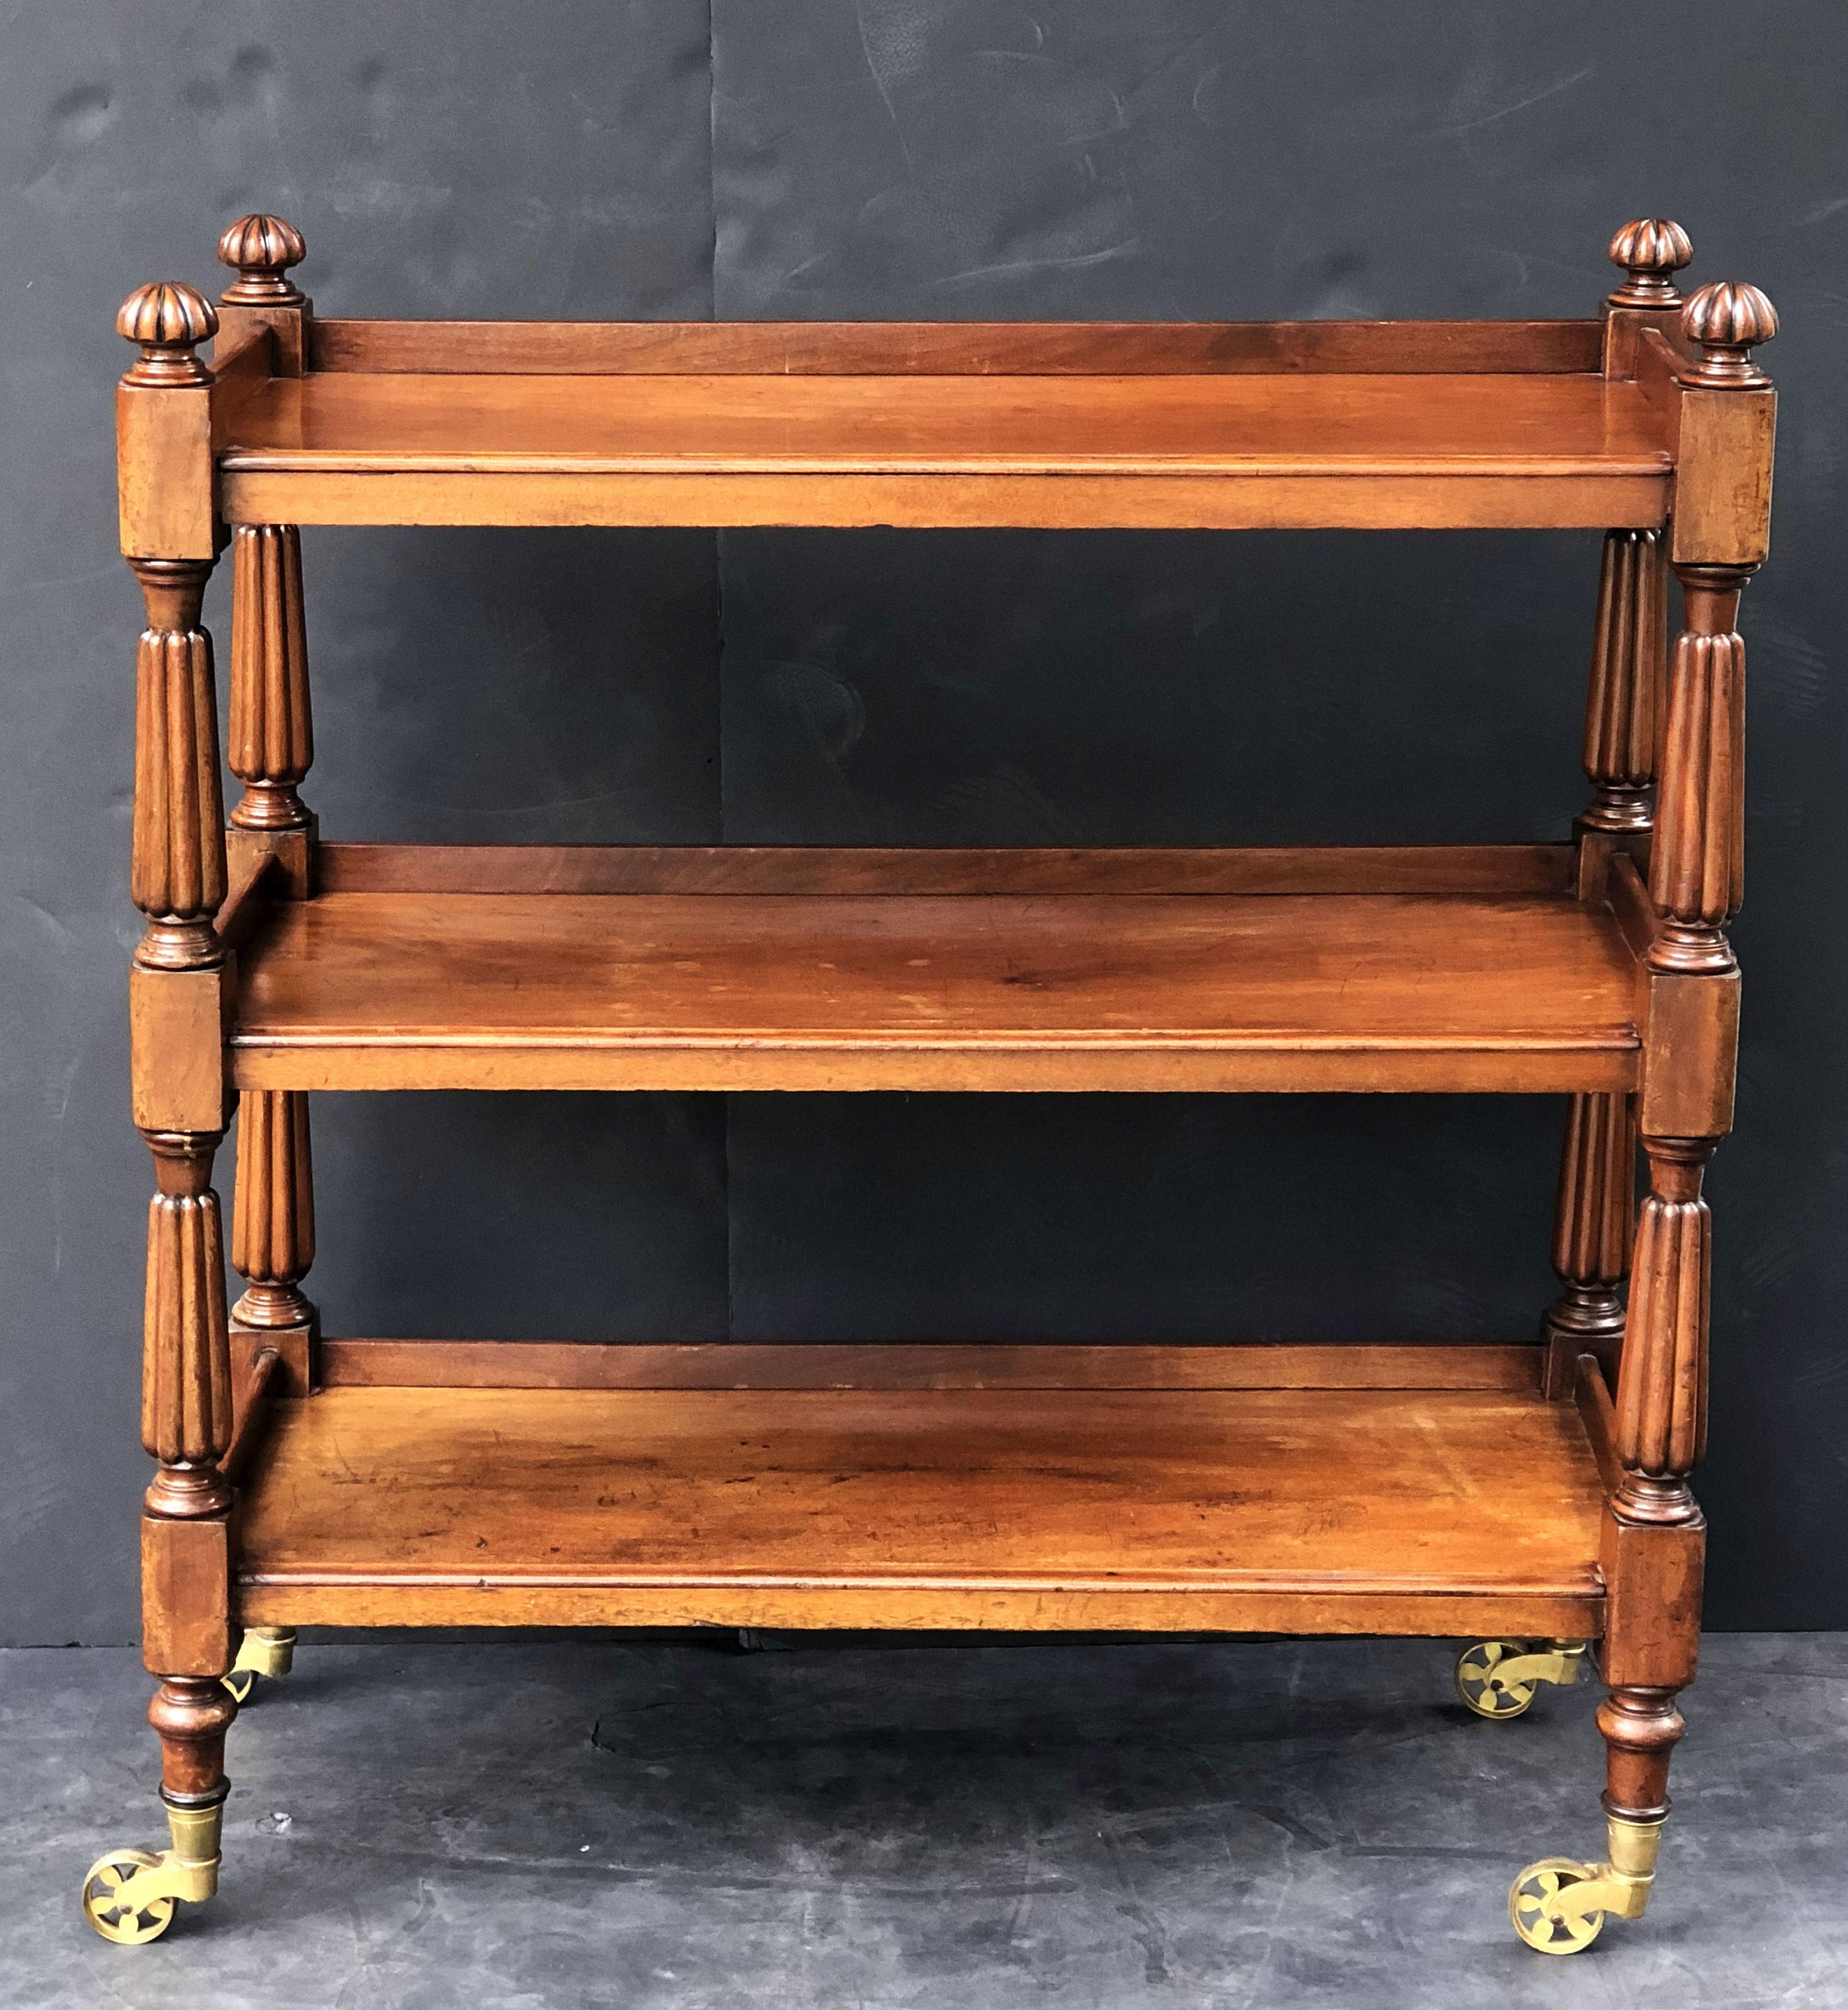 A fine English buffet trolley or console server (or dumb waiter) of mahogany, with William IV styling, featuring three tiers with edge-moulded tops, each with back gallery frieze, each tier adjoined to four turned column supports topped with